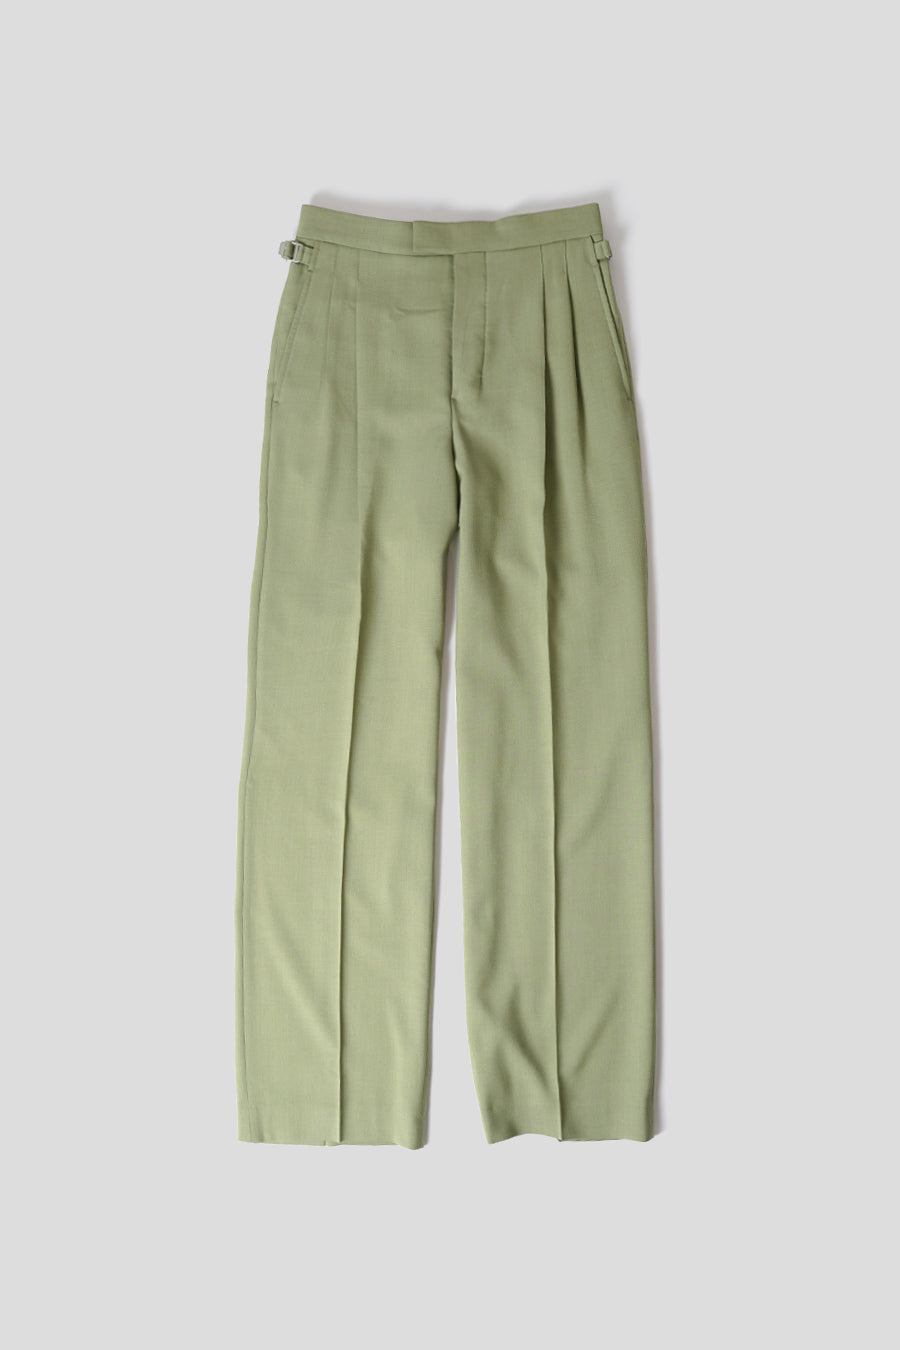 AMI PARIS - OLIVE WOOL AND VISCOSE WIDE-LEG TROUSERS - LE LABO STORE